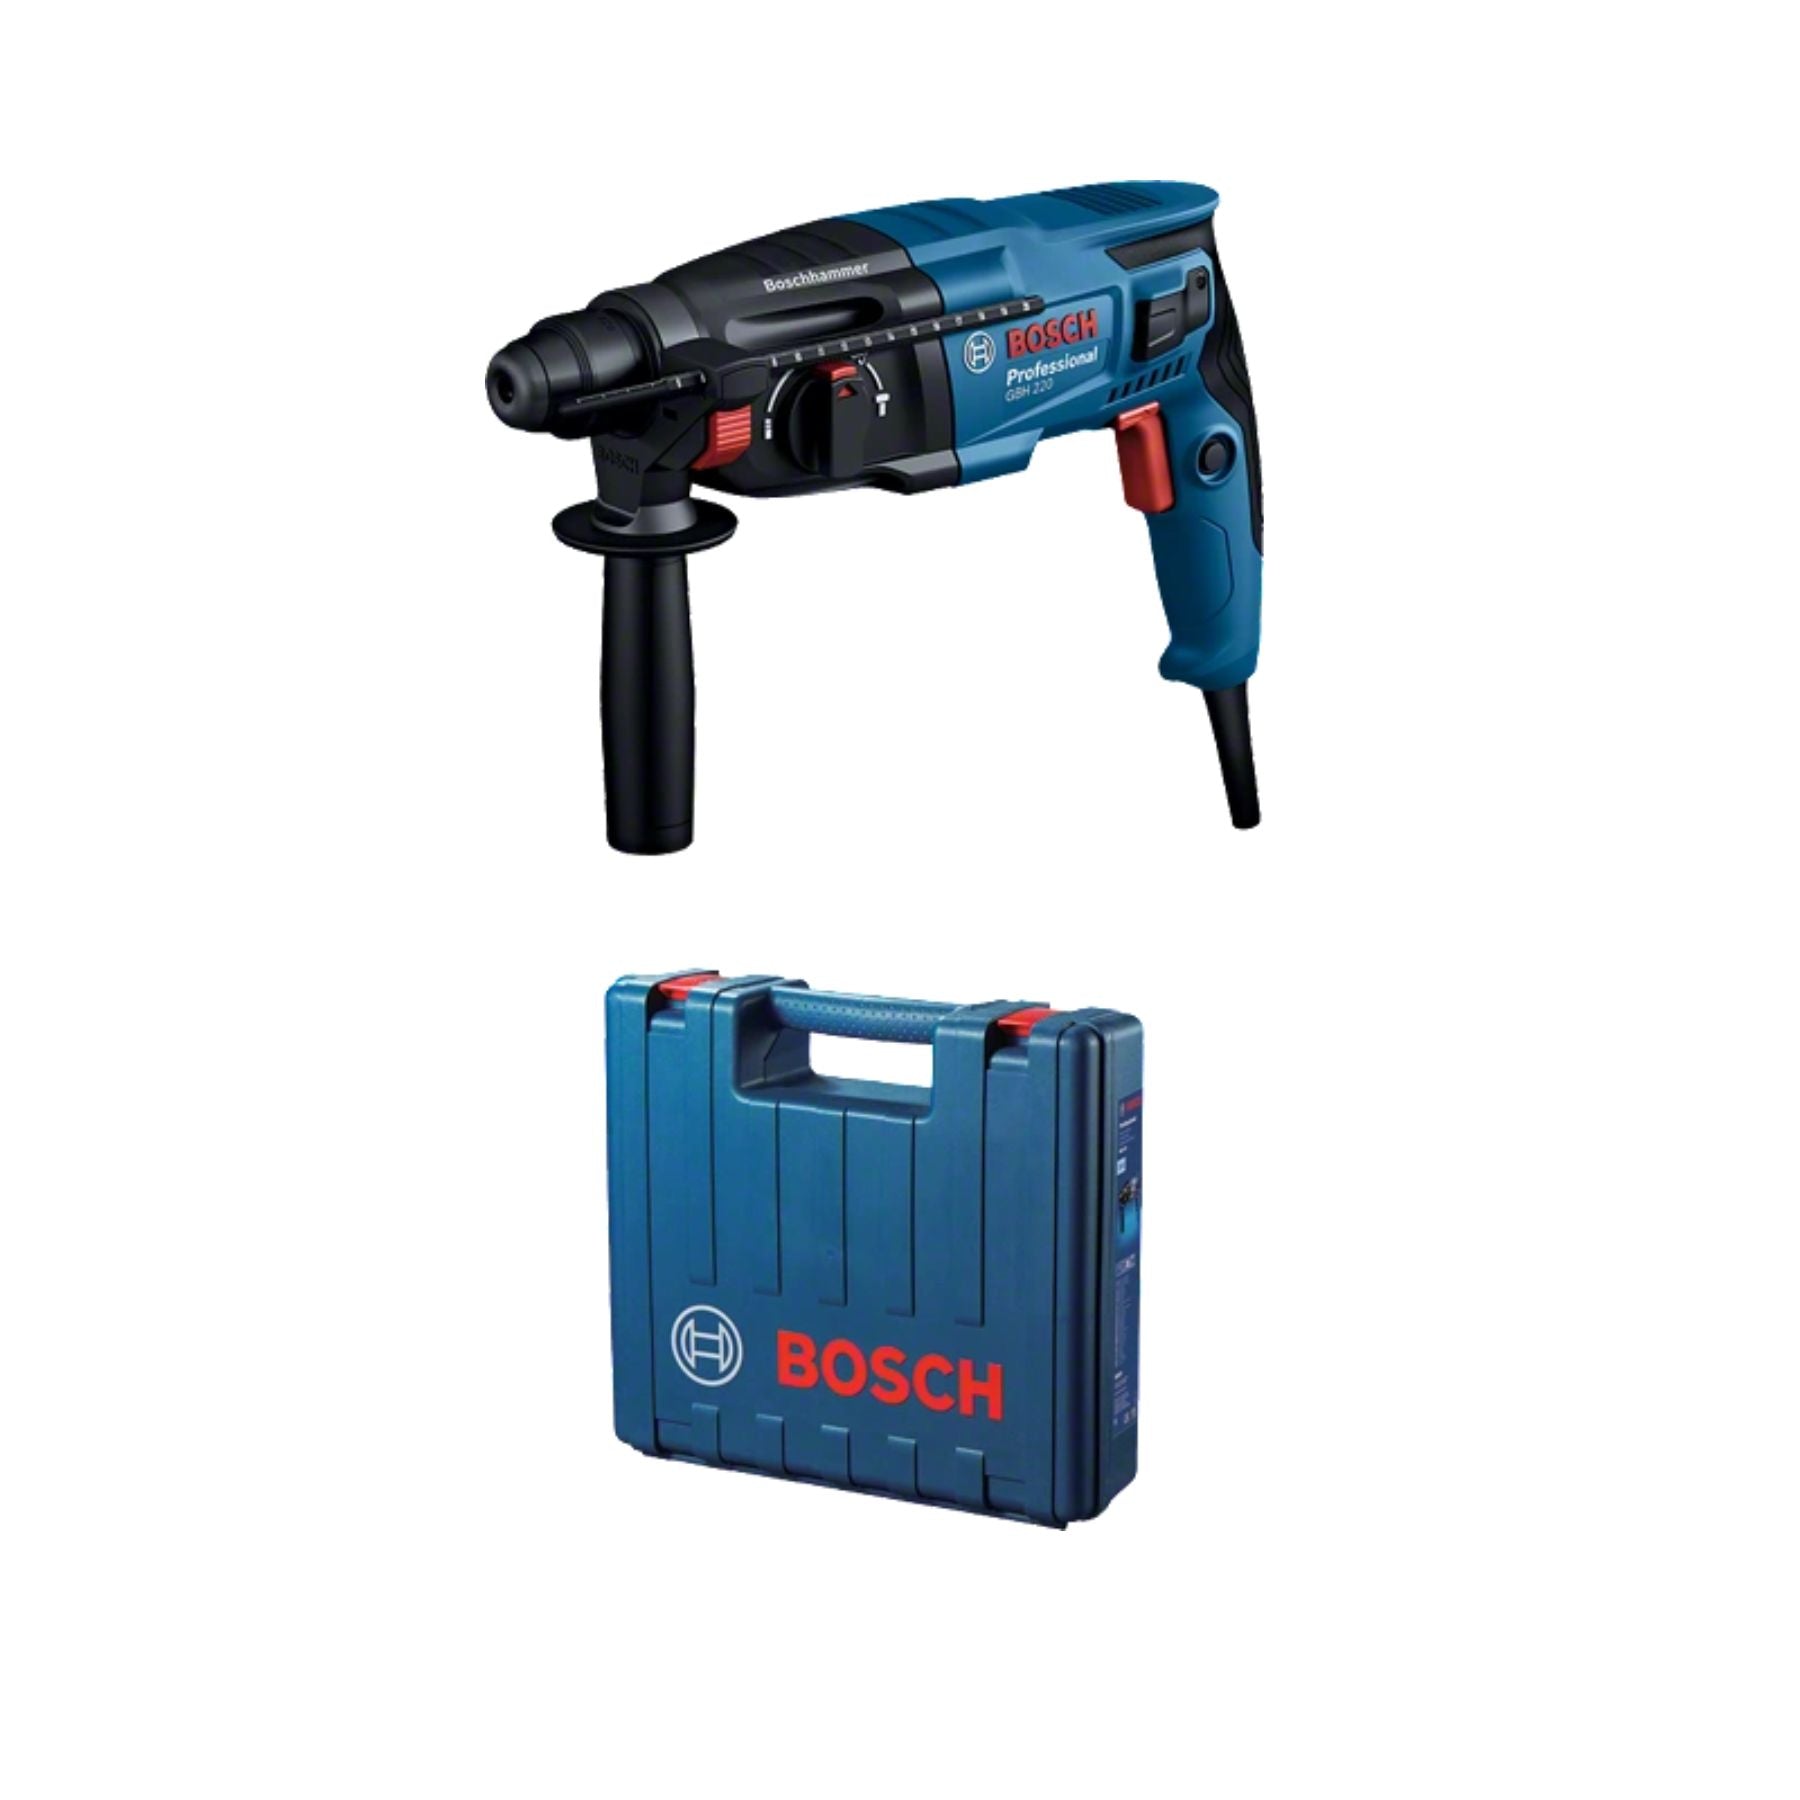 Bosch (GBH 220) Rotary Hammers 720W 3 Mode SDS Plus